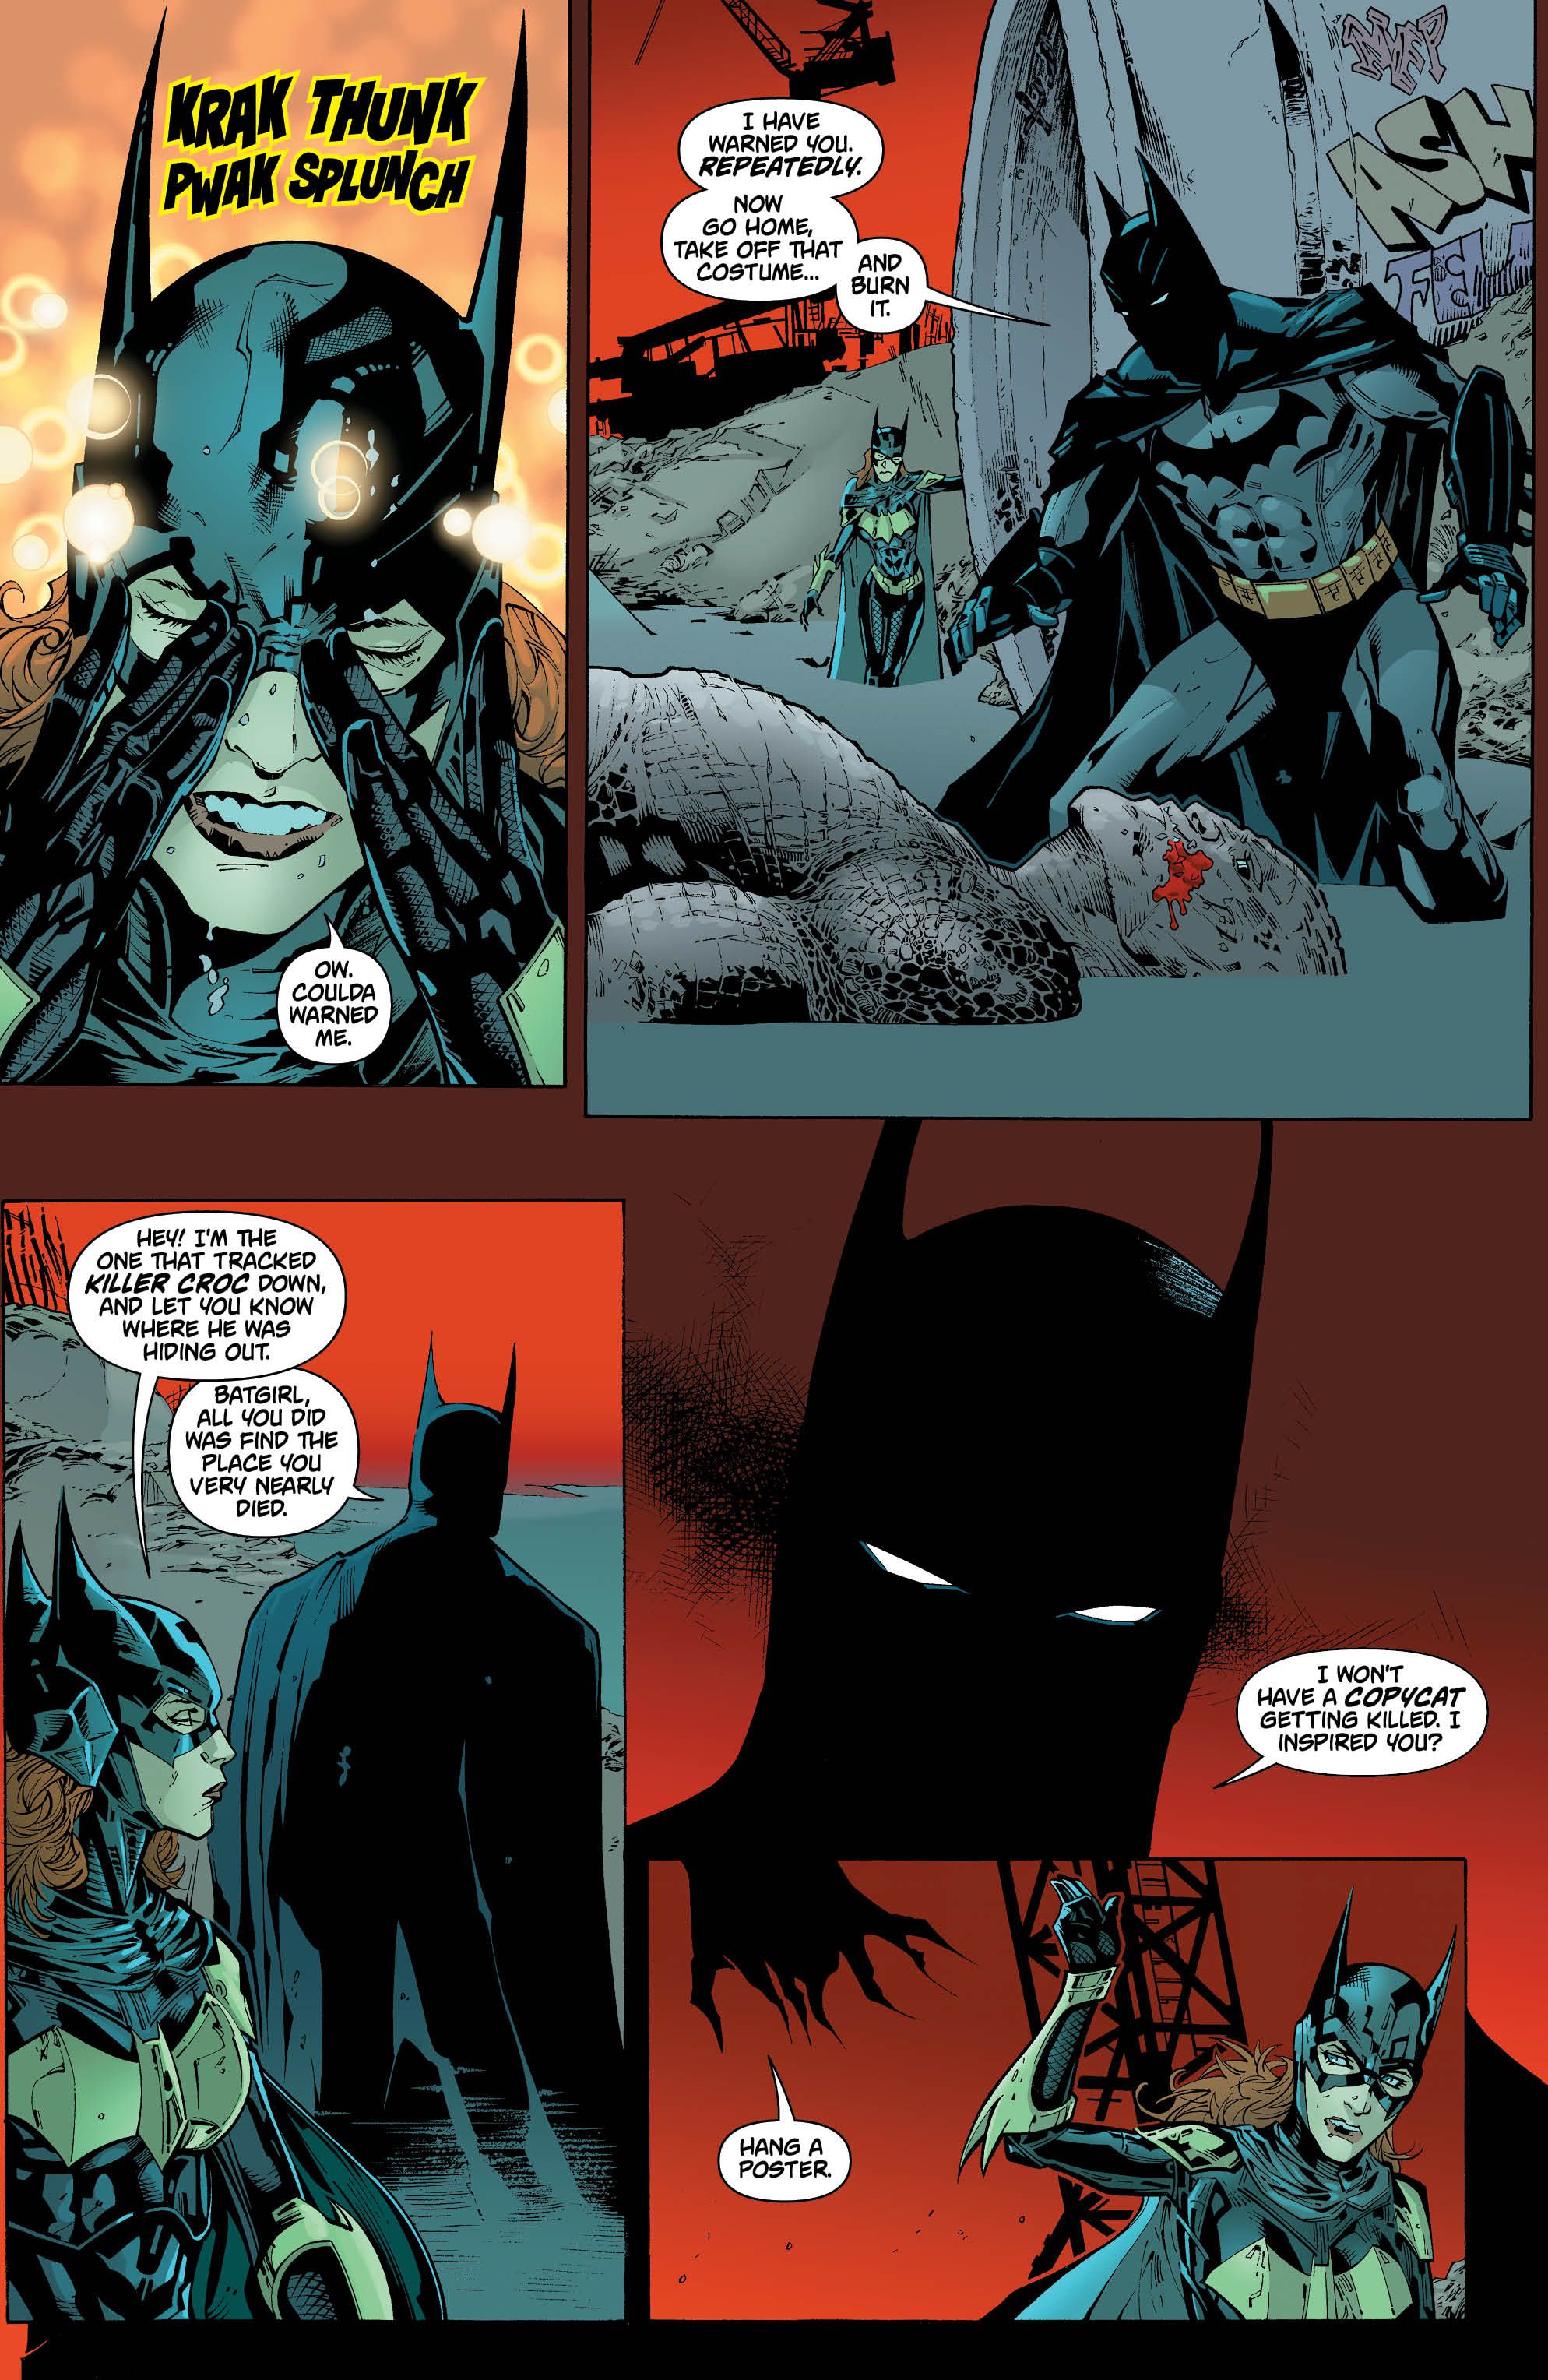 Preview: Find out Batgirl's origin story in Arkham Knight ...